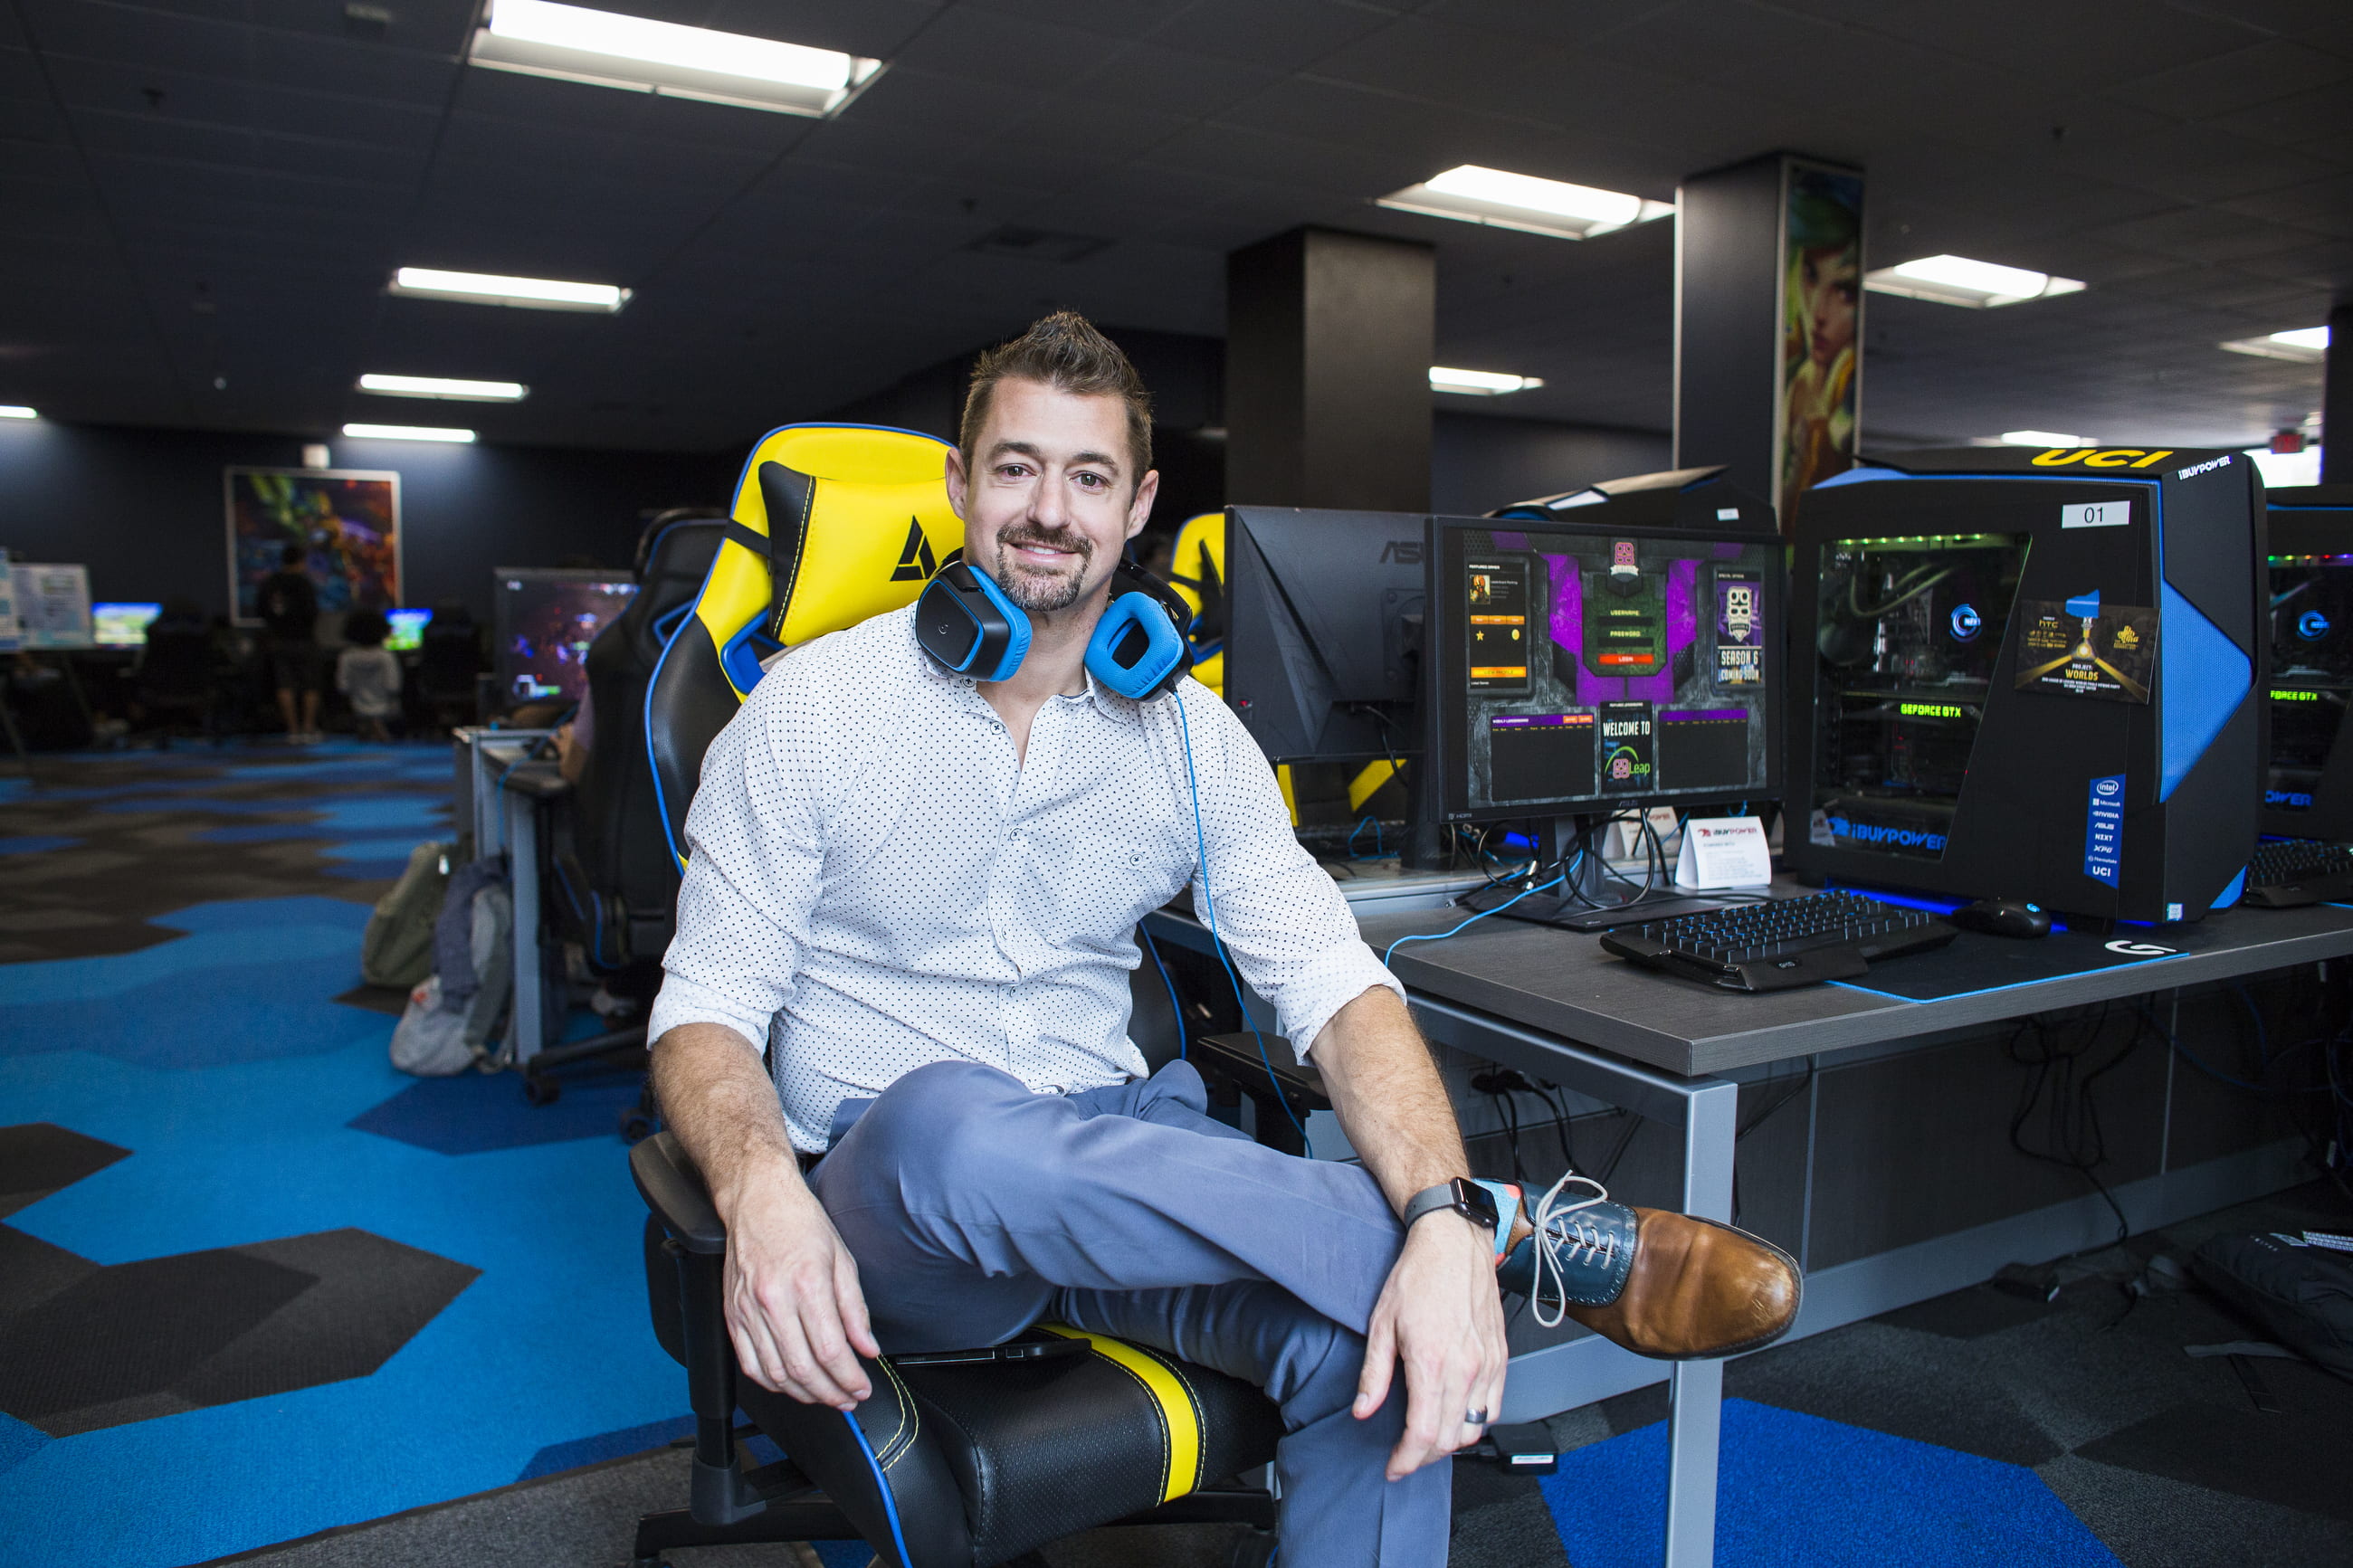 The UCI Esports Arena is the first of its kind on a college campus and is located at the Student Center Terrace. Students, staff, faculty, alumni and guests are welcome, where we provide a variety of the most popular games at UCI.